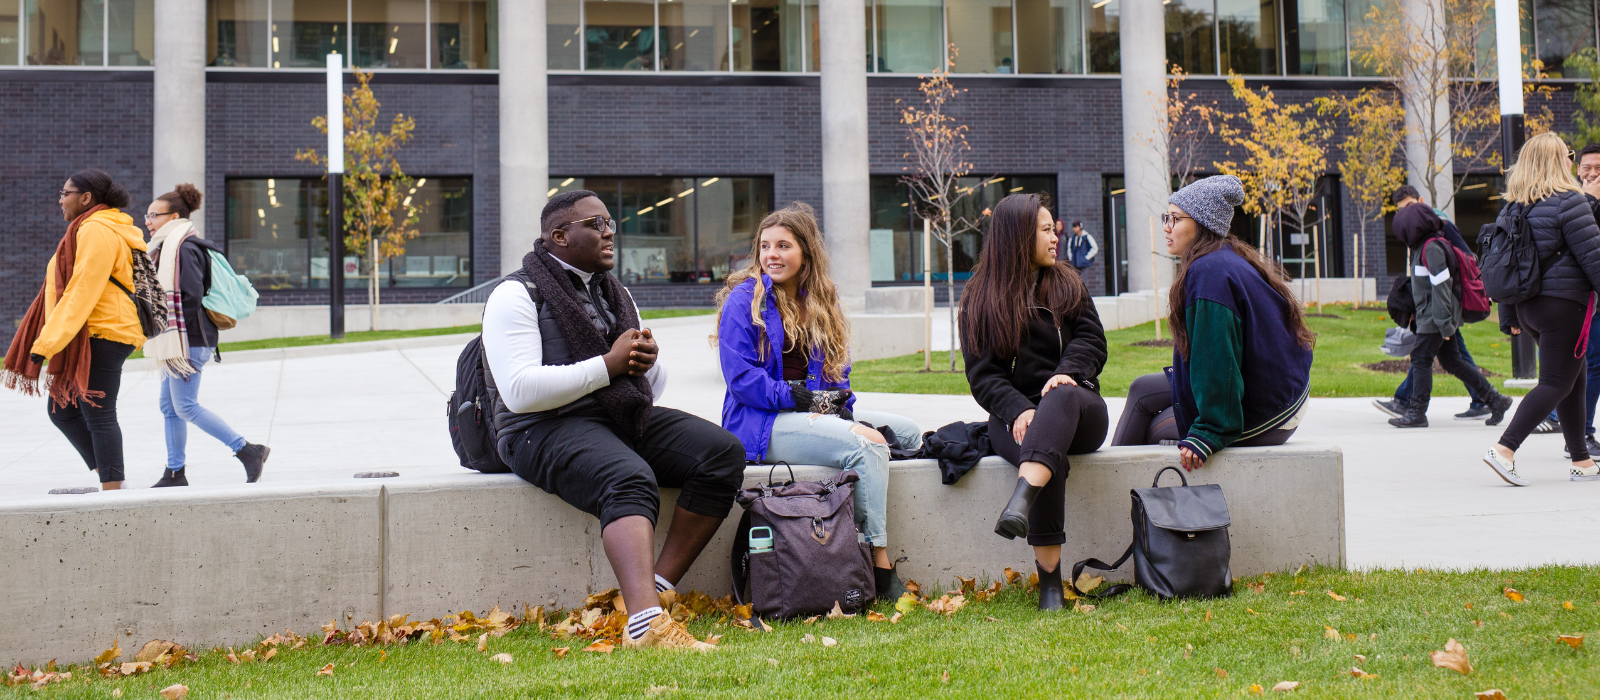 Students sitting and chatting outside on a campus